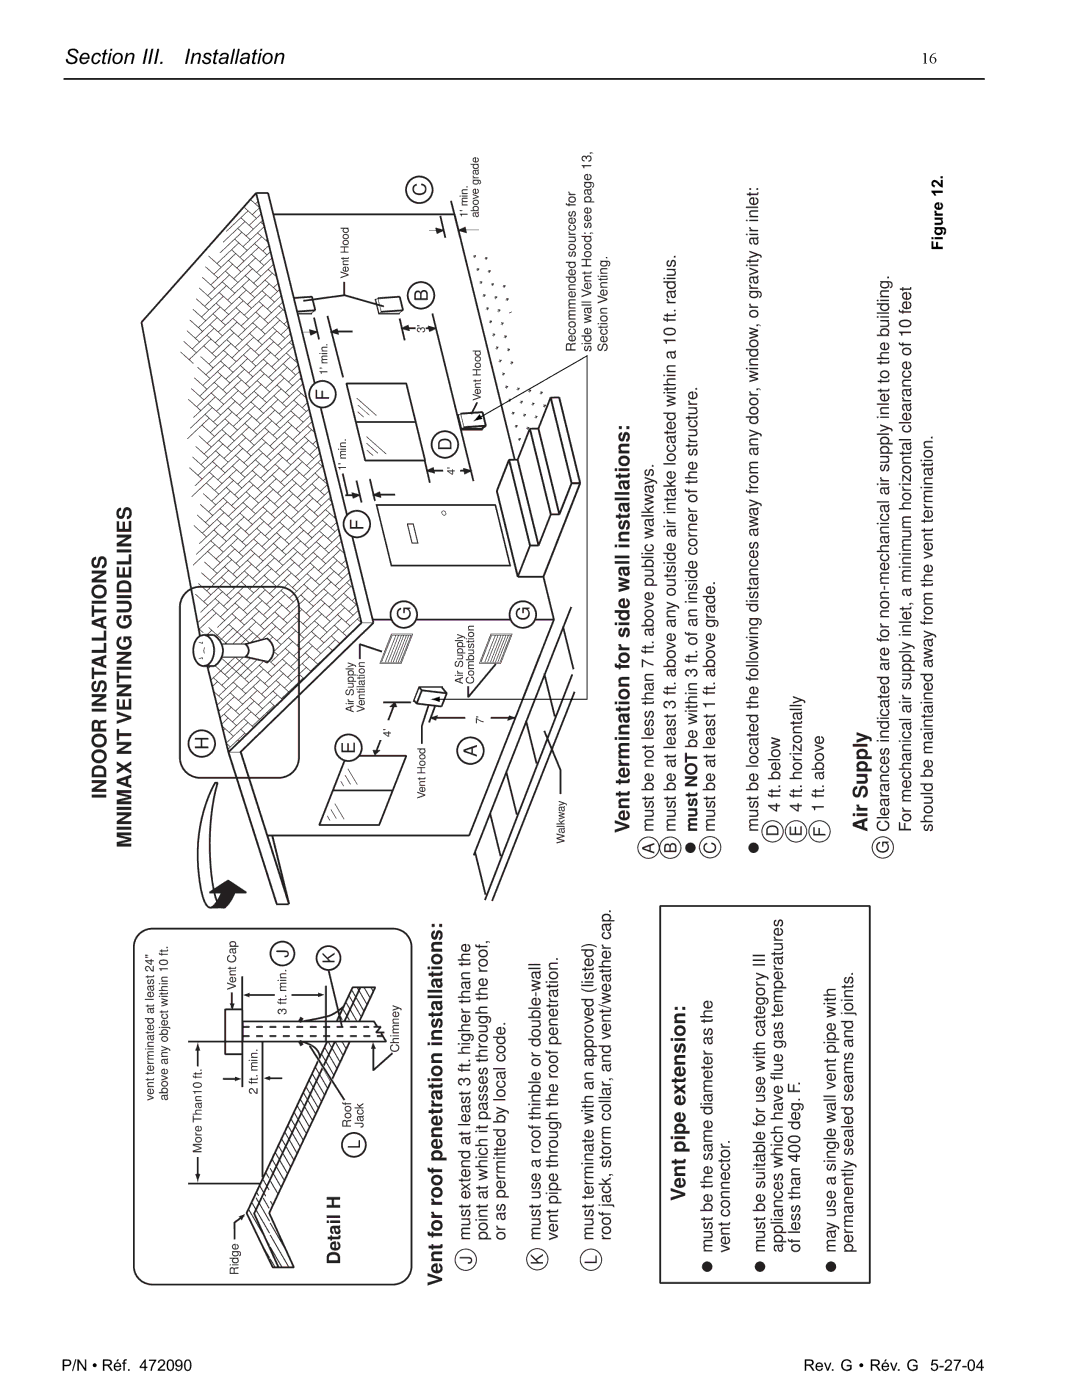 Pentair 200 installation manual Section 